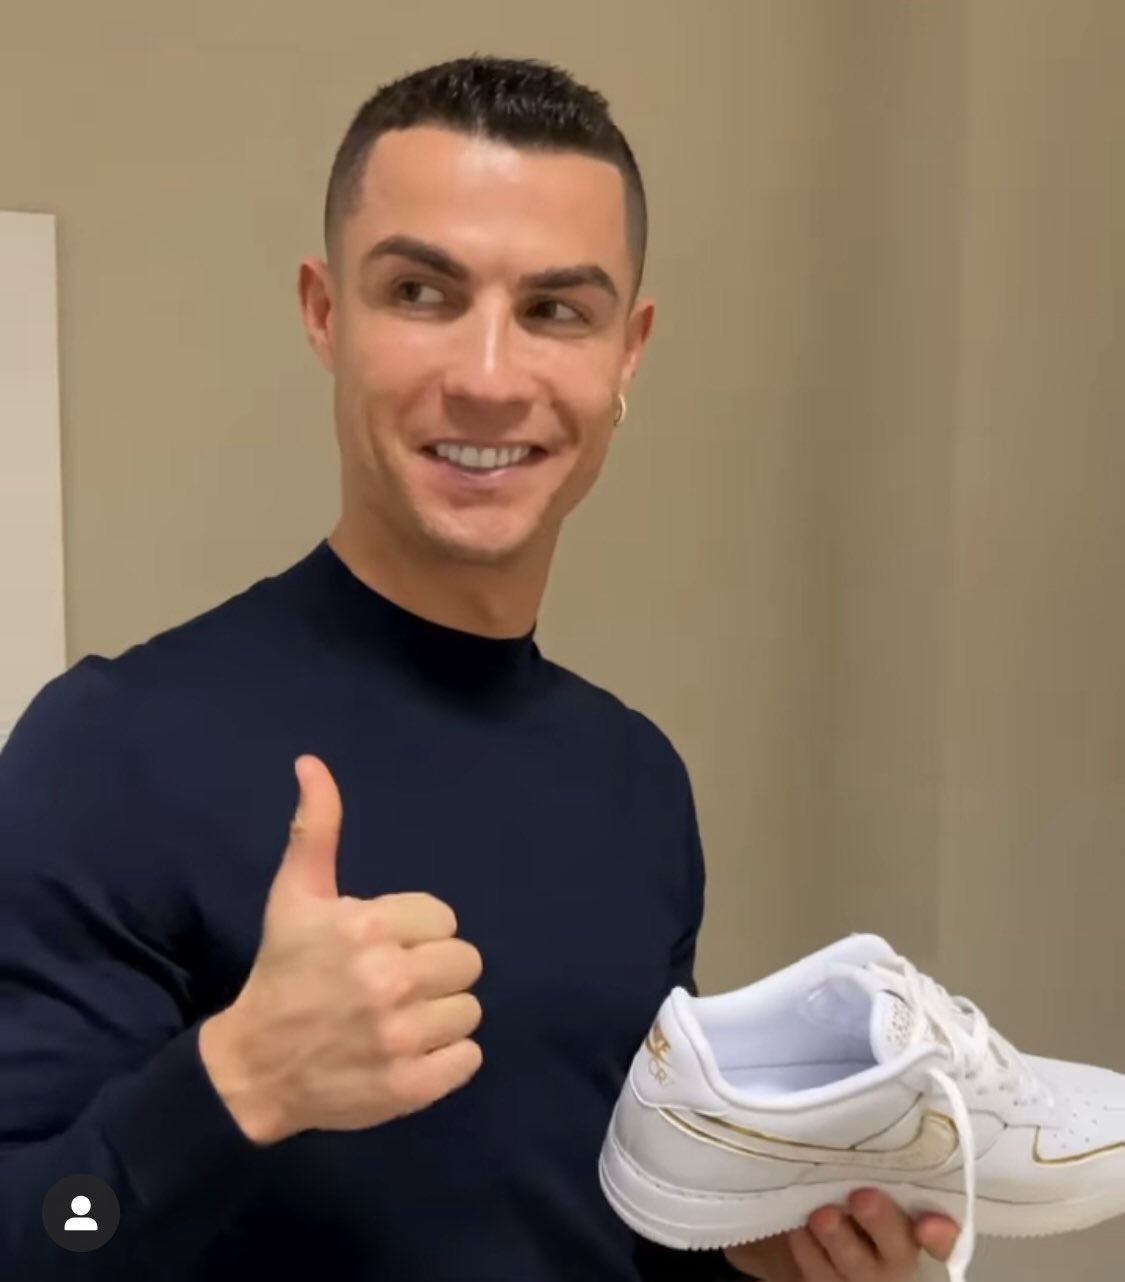 TCR. on X: 🎁 Cristiano Ronaldo with a gift from Nike on his birthday.   / X